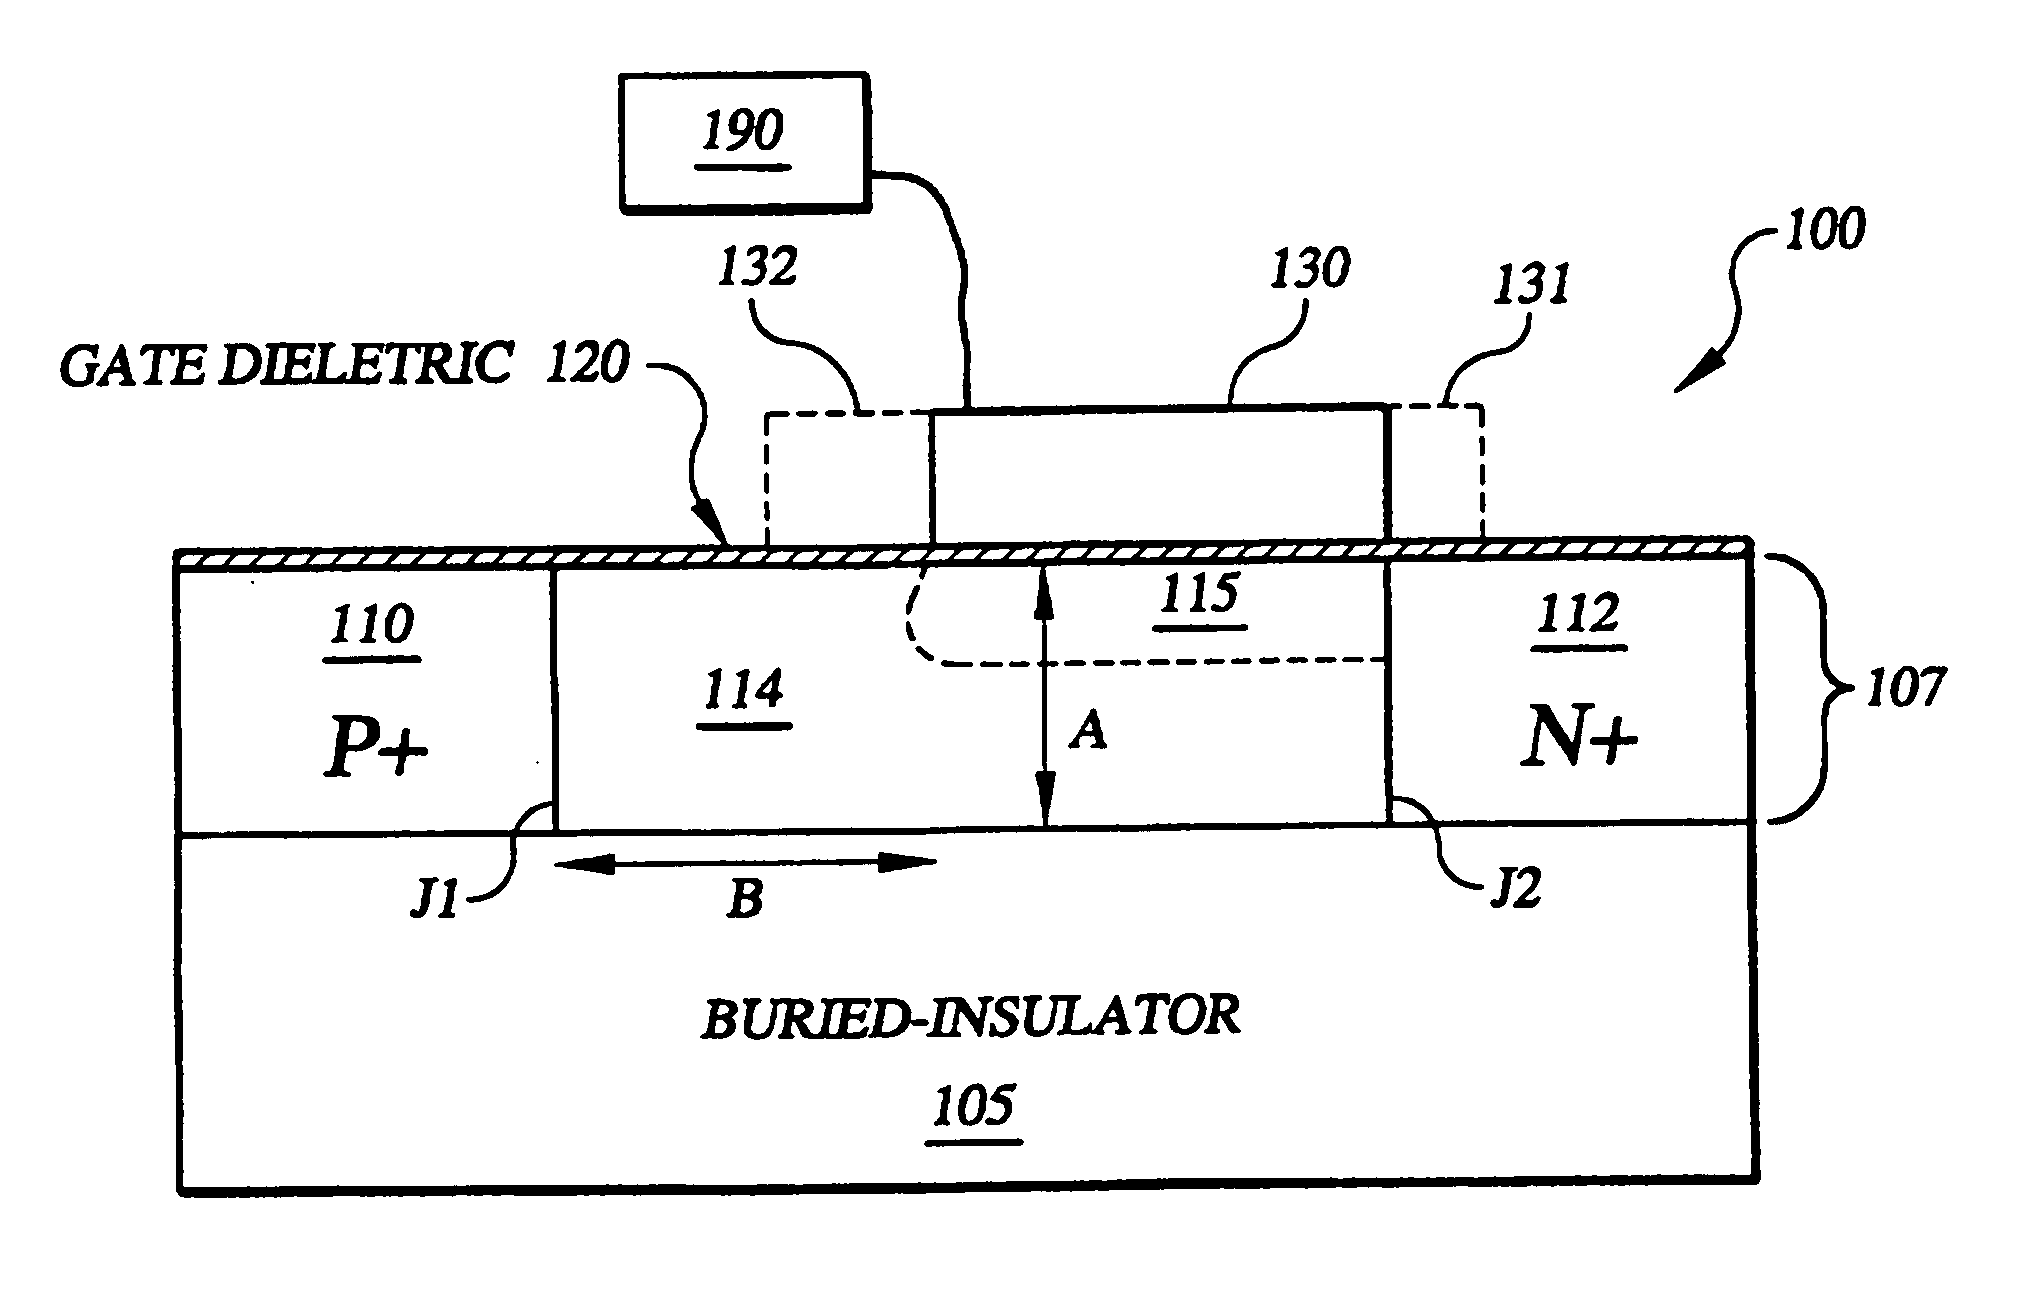 Insulated-gate semiconductor device and approach involving junction-induced intermediate region